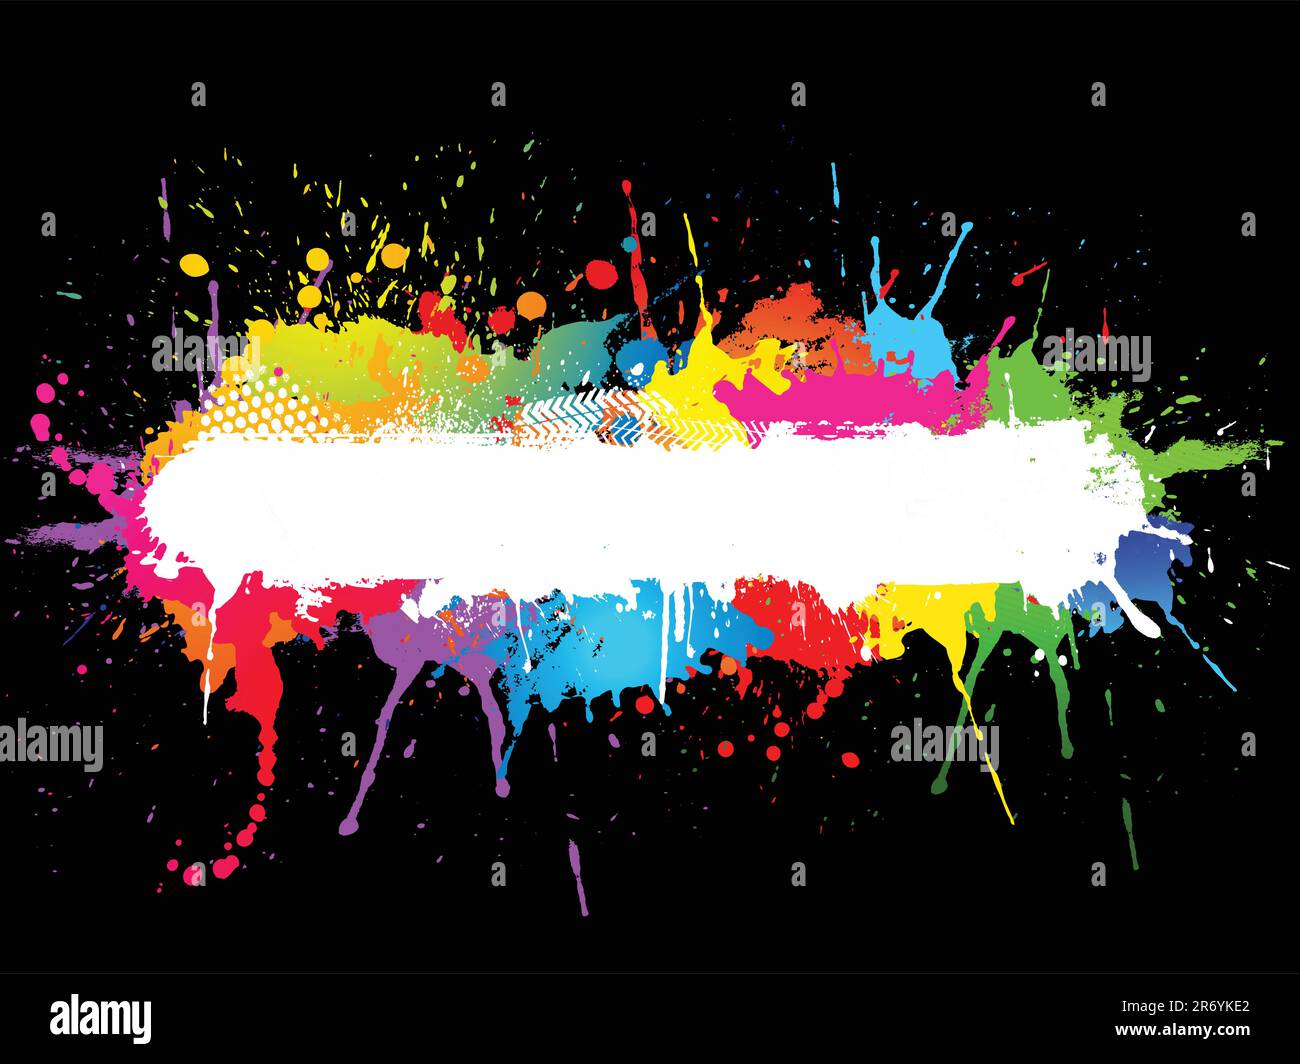 Grunge background with colourful paint splats Stock Vector